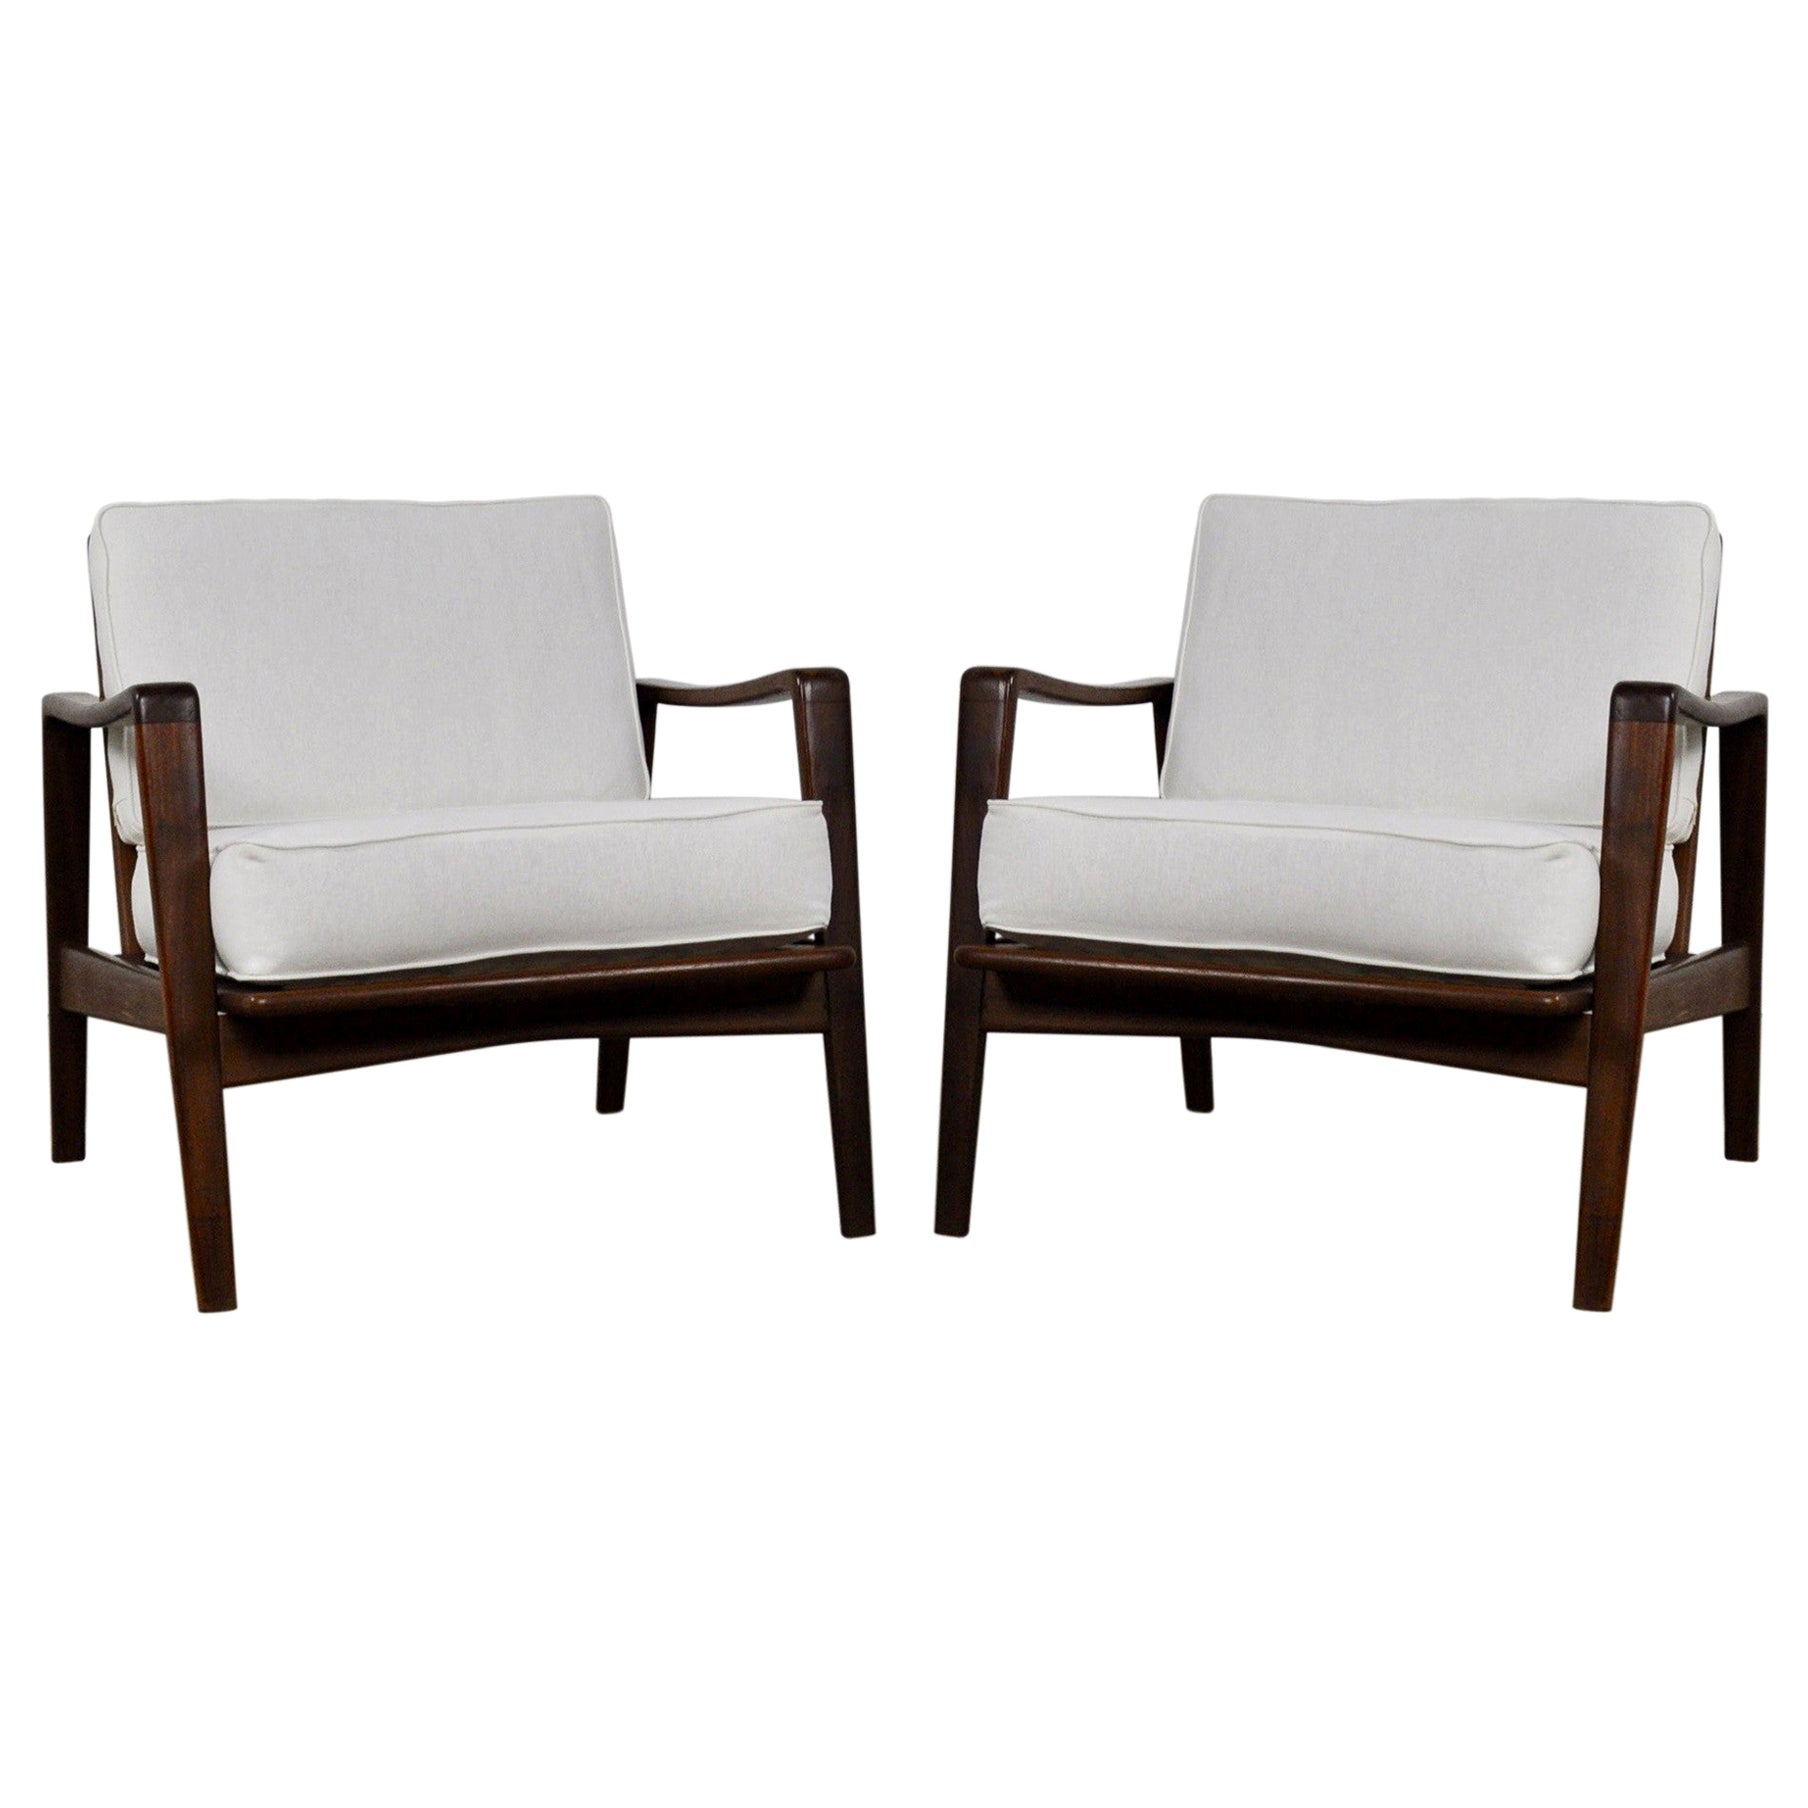 1960's Arne Wahl Iversen Easy Chairs by Komfort, Denmark For Sale